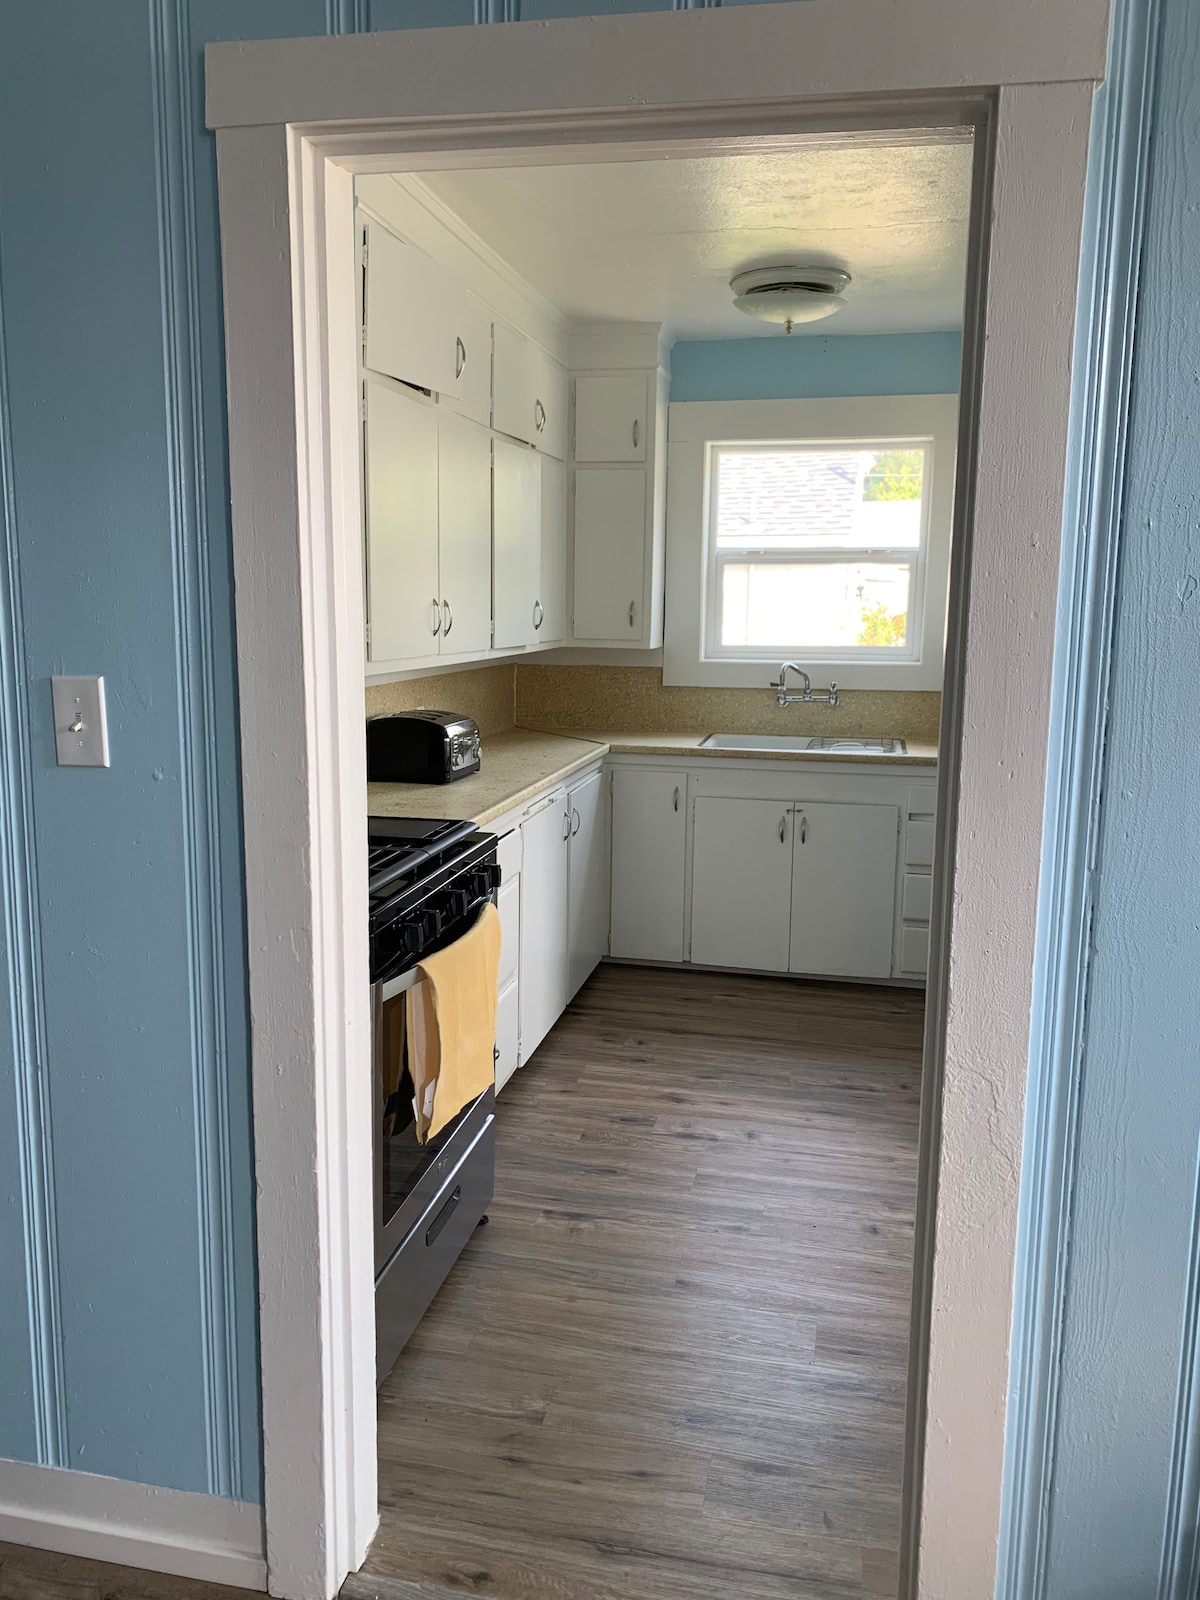 The Blue Bungalow - 2 Bedroom Cottage in Medford